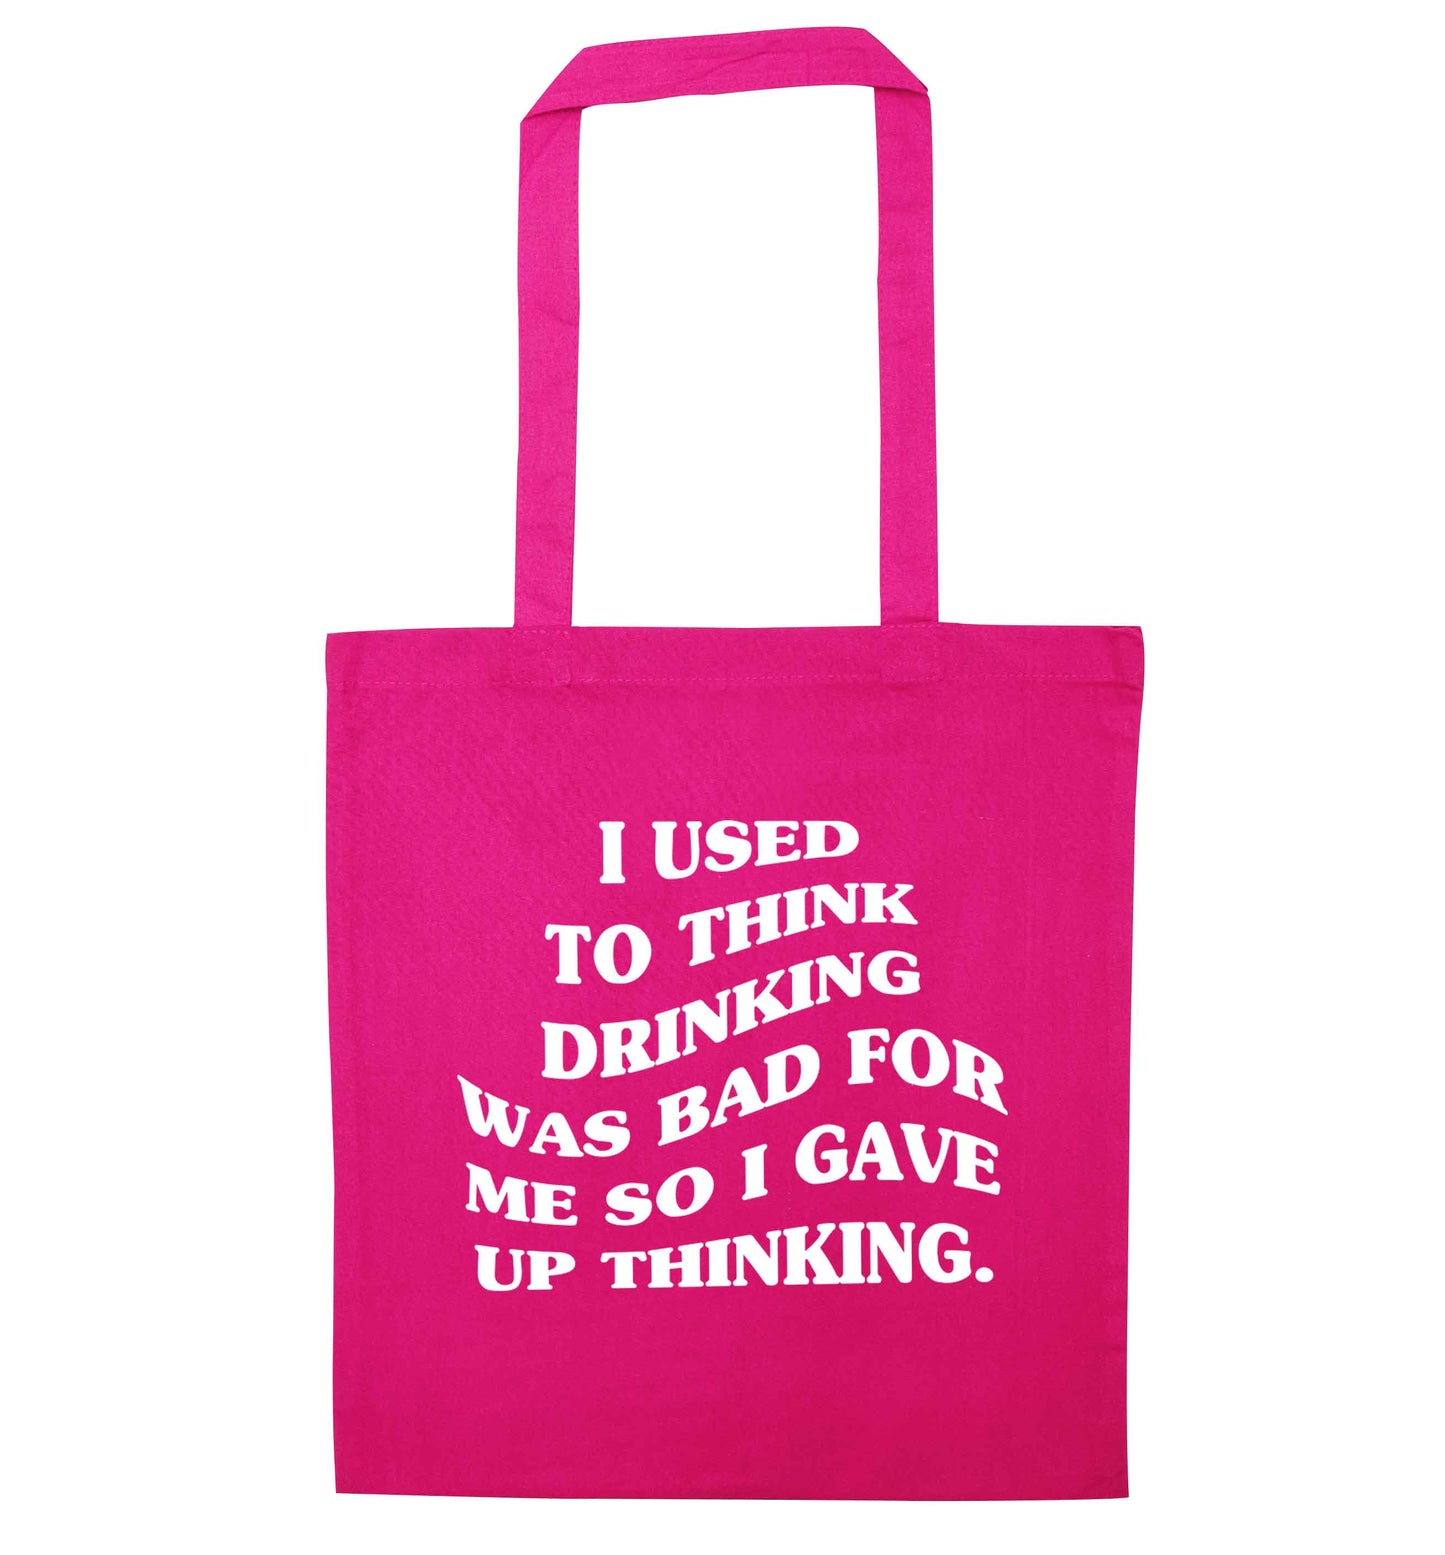 I used to think drinking was bad so I gave up thinking pink tote bag